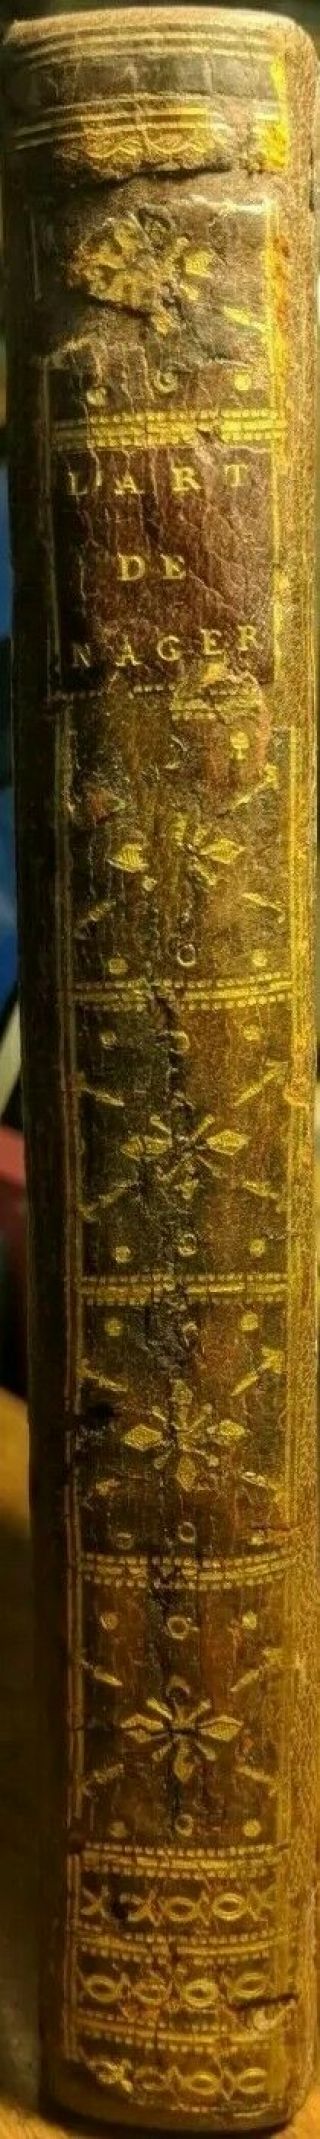 THE ART OF SWIMMING 1782 FRENCH EDITION L ' ART DE NAGER MELCHISEDECH THEVENOT 4